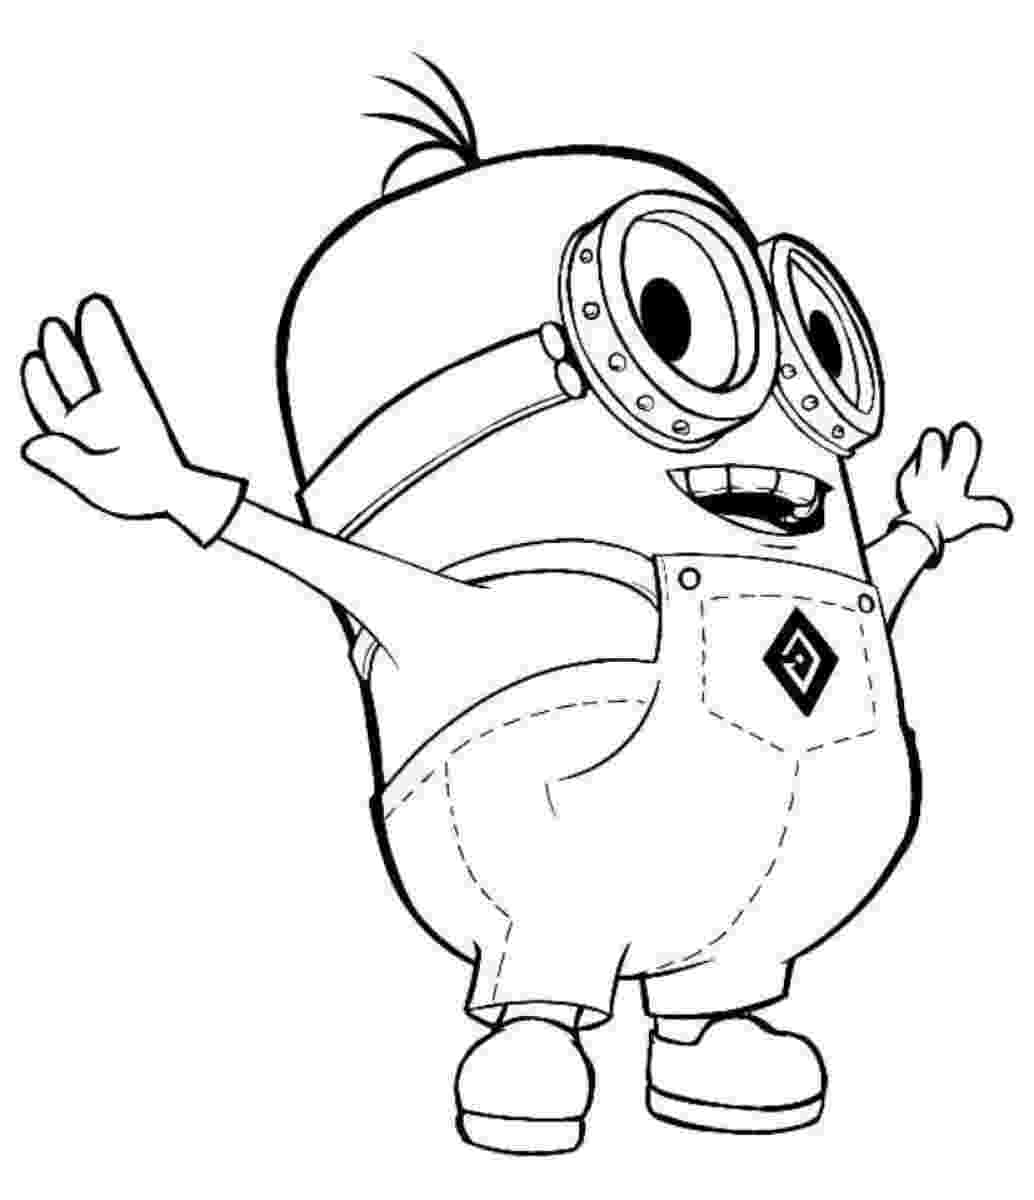 despicable me coloring pages free despicable me 3 coloring pages to download and print for free coloring pages free me despicable 